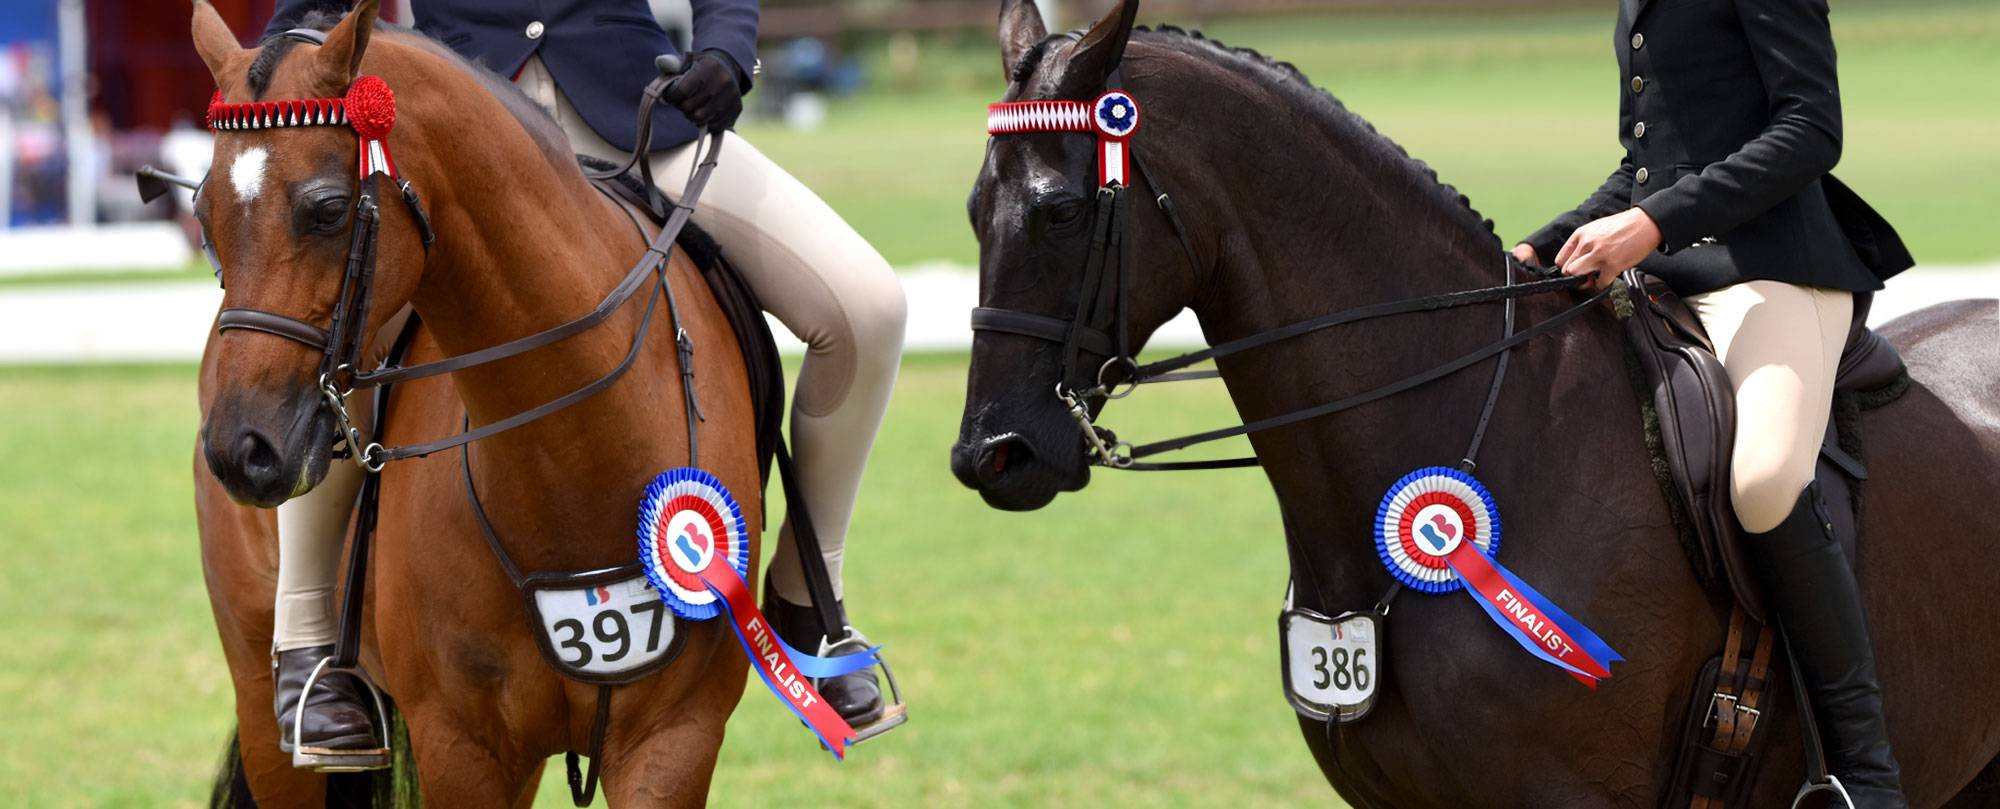 Rosettes for equestrian events.